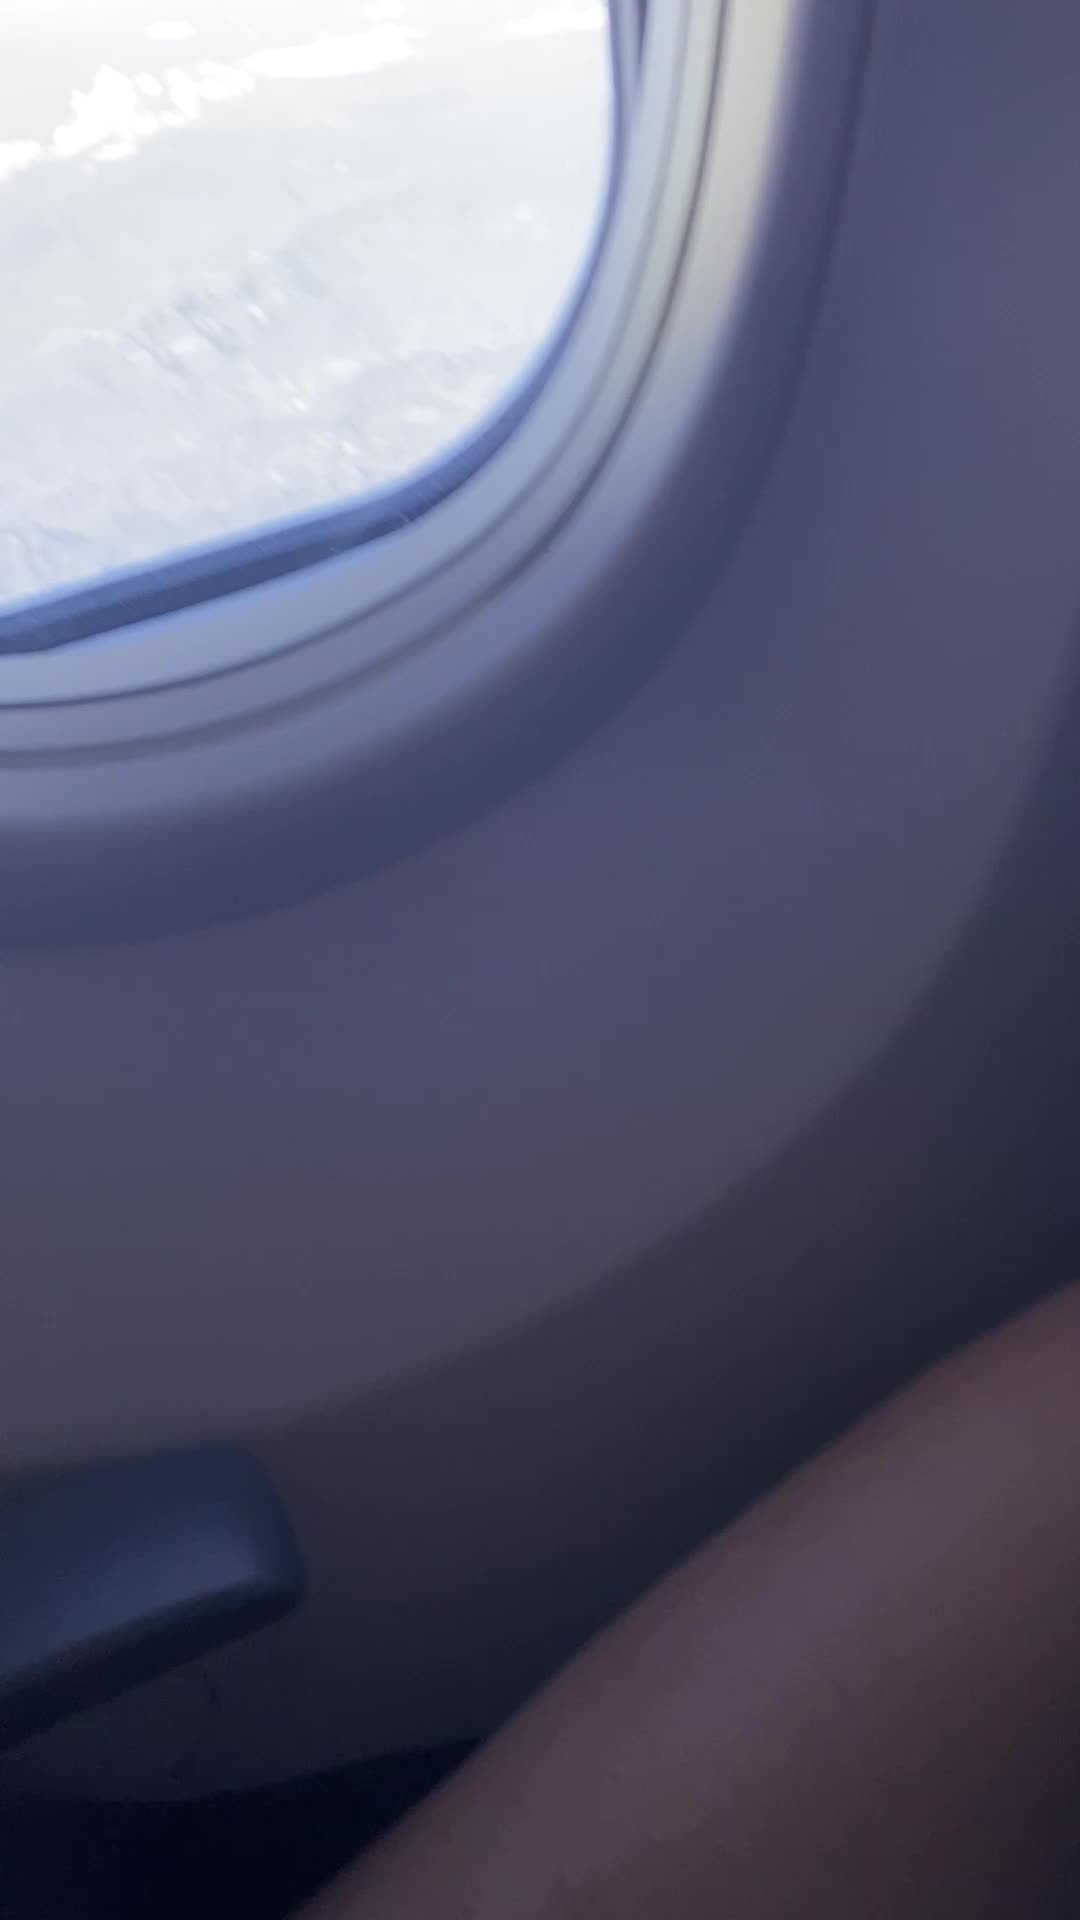 Video by Sunny and Lightning with the username @SunnyLightning,  October 17, 2021 at 11:58 PM. The post is about the topic Public naughty things and the text says 'No panties on the plane = lots of fun! Mile high club'